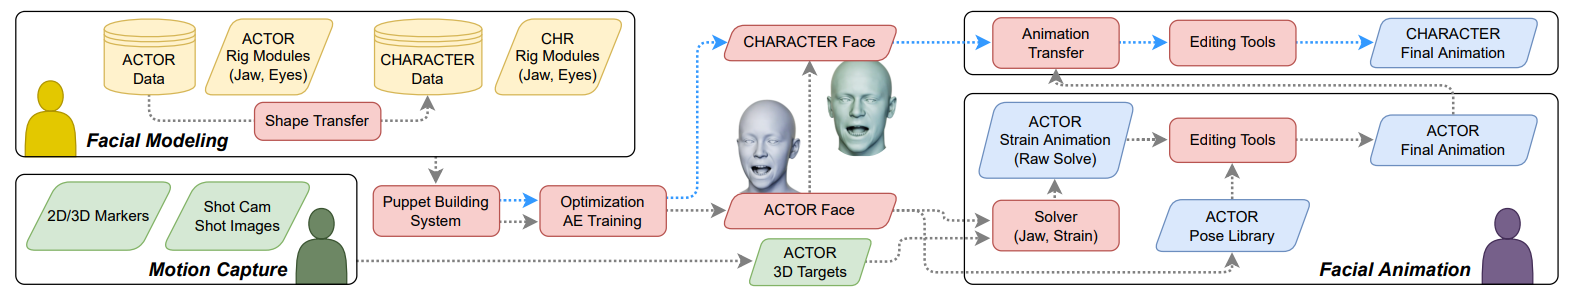 Animatomy: an Animator-centric, Anatomically Inspired System for 3D Facial Modeling, Animation and Transfe